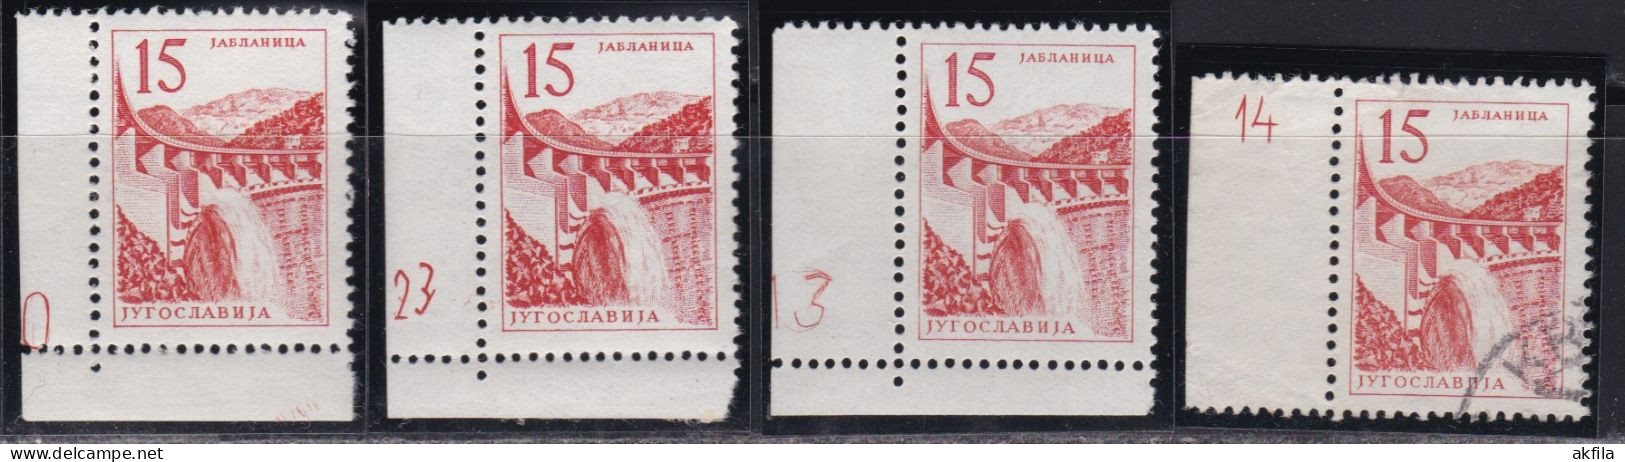 Yugoslavia 1958 Definitive Stamps With Printing Plate Markings, MNH And Used Michel 857. - Usados